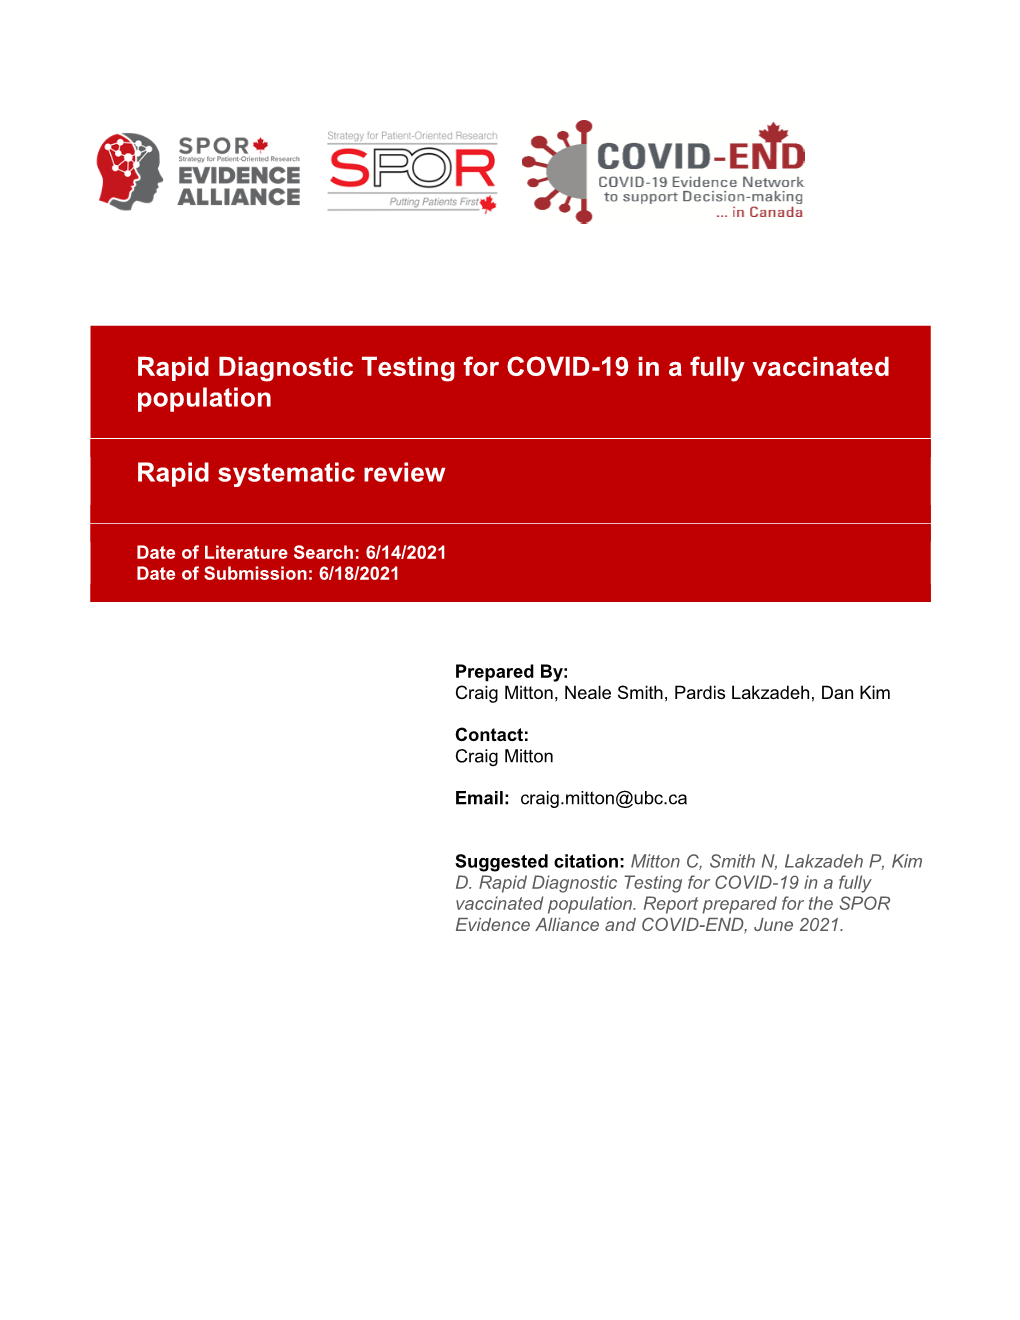 Rapid Diagnostic Testing for COVID-19 in a Fully Vaccinated Population